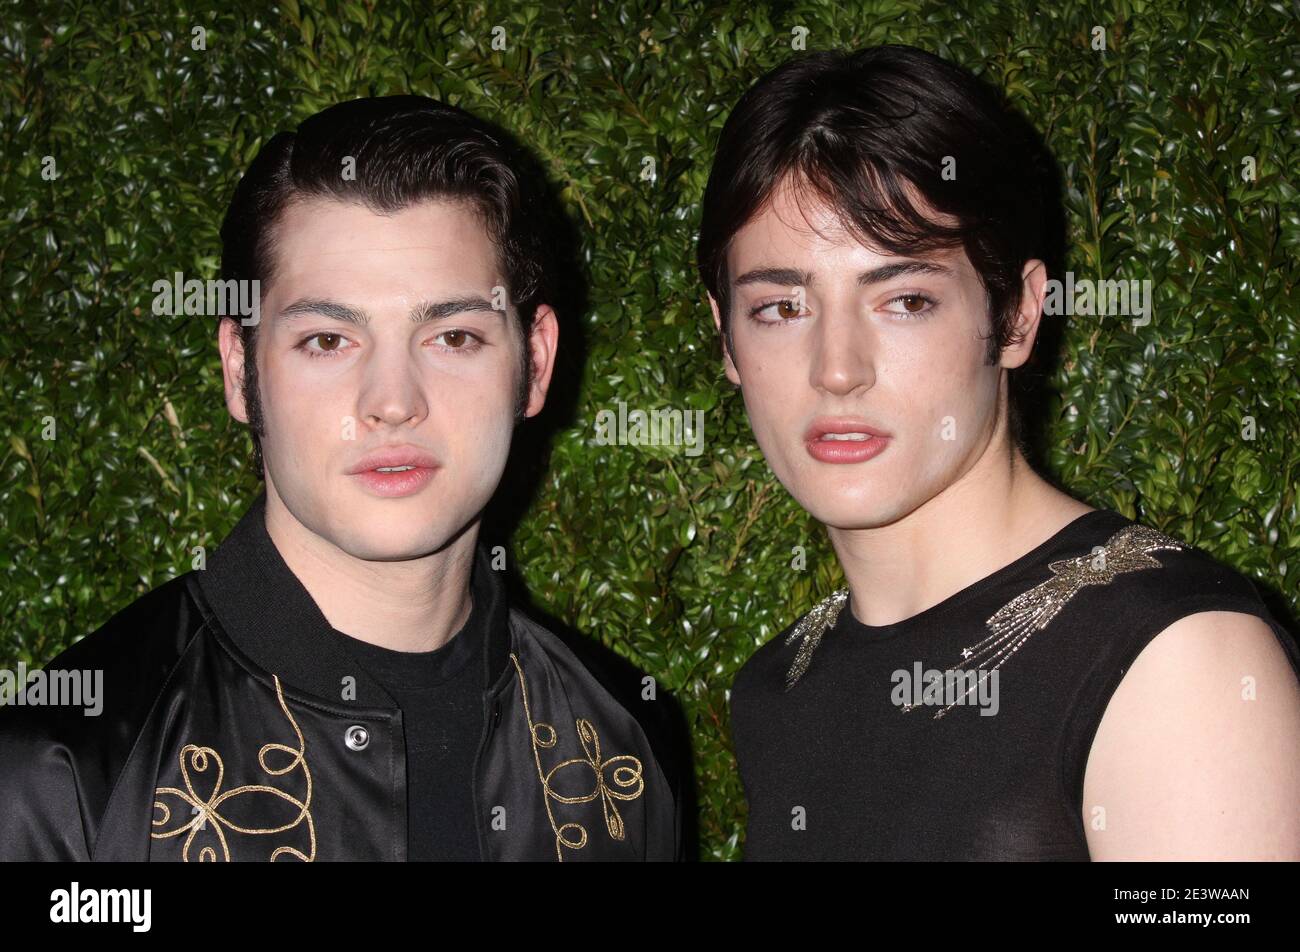 Peter Brant, Jr.and Harry Brant, sons of Stephanie Seymour and Peter M. Brant attend the tenth annual CHANEL Tribeca Film Festival Artist Dinner at Balthazar Restaurant in New York City on April 20, 2015.  Photo Credit: Henry McGee/MediaPunch Stock Photo